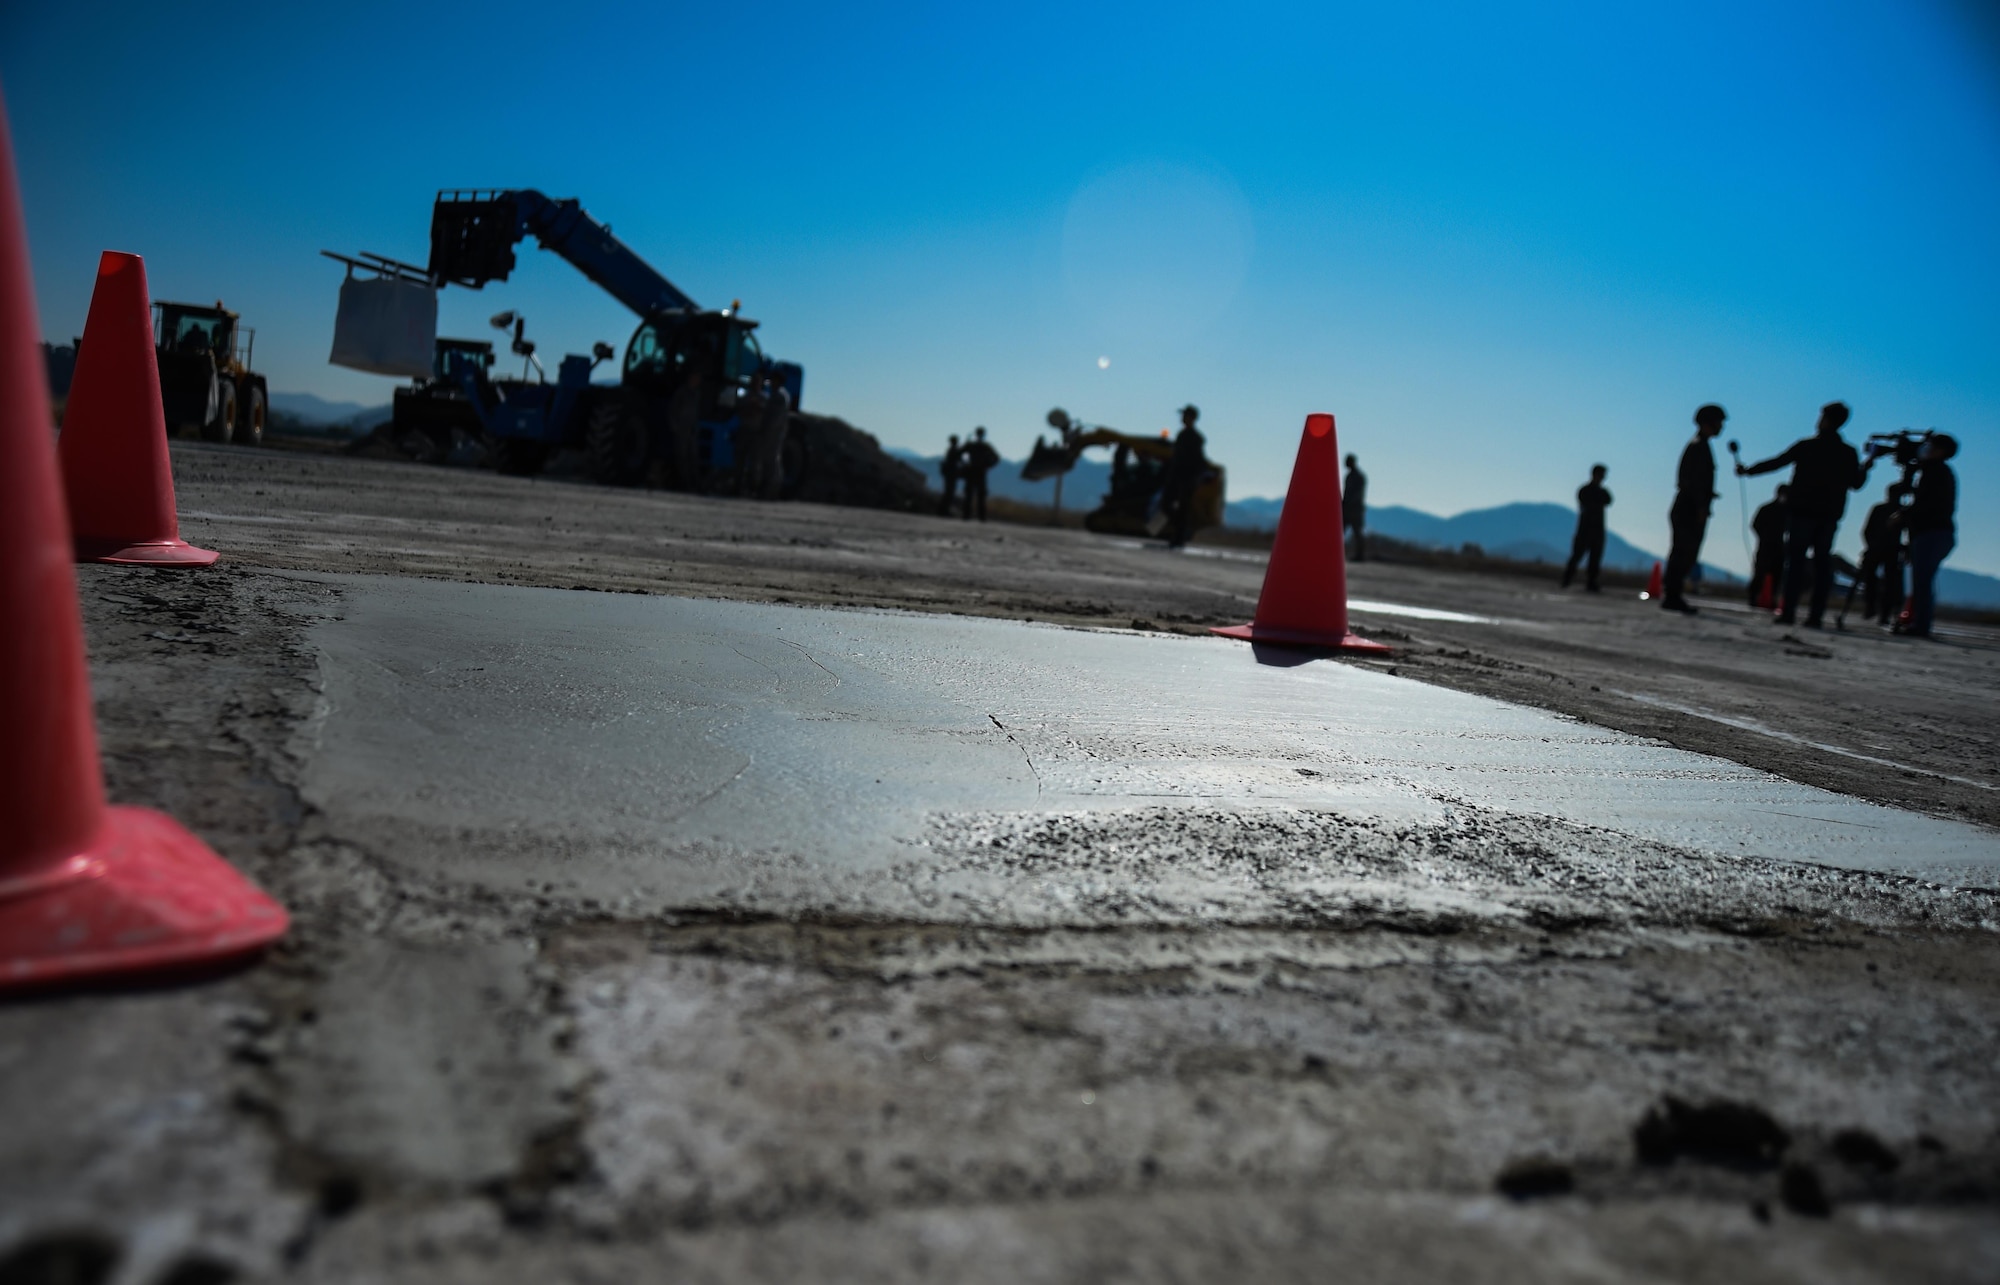 Freshly poured concrete cures on a mock airstrip during a Rapid Airfield Damage Repair bilateral training exercise at Gwangju Air Base, Republic of Korea, Nov. 9, 2017. Forty U.S. Airmen from the 773d Civil Engineer Squadron at Joint Base Elmendorf-Richardson, Alaska, and 40 R.O.K. Airmen trained together for a week to learn a new runway repair process for wartime contingencies. The bilateral training exercise enhanced interoperability and strengthen partnerships in the Indo-Asia Pacific region. (U.S. Air Force photo by Senior Airman Curt Beach)